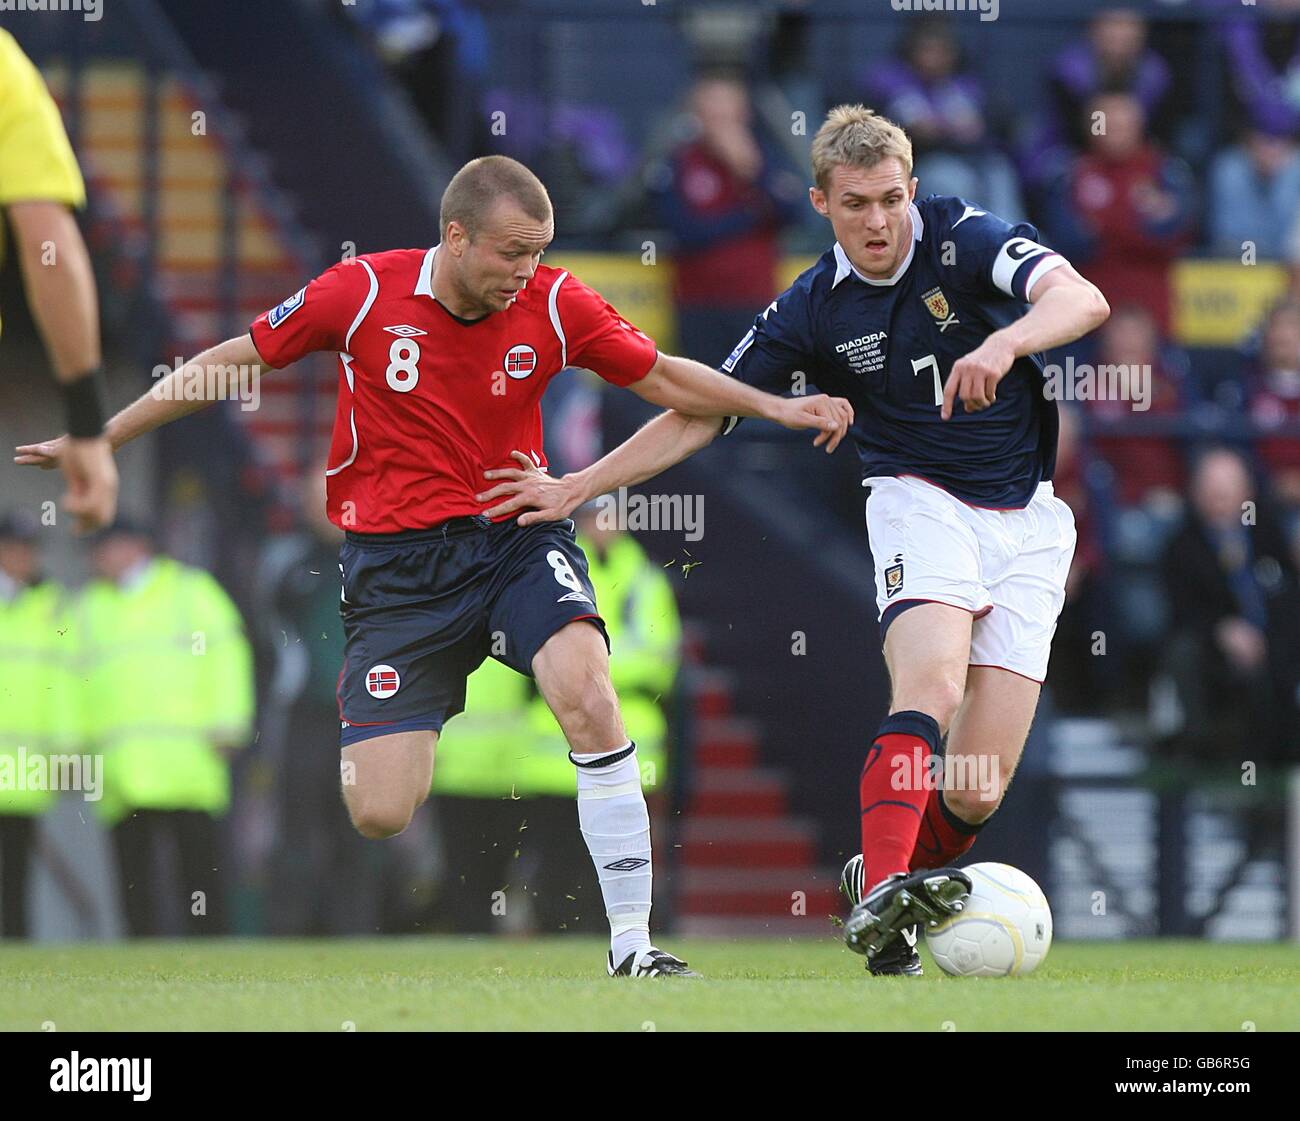 Soccer - FIFA World Cup 2010 - Qualifying Round - Group Nine - Scotland v Norway - Hampden Park. Scotland's Darren Fletcher (r) and Norway's Christian Grindheim battle for the ball Stock Photo